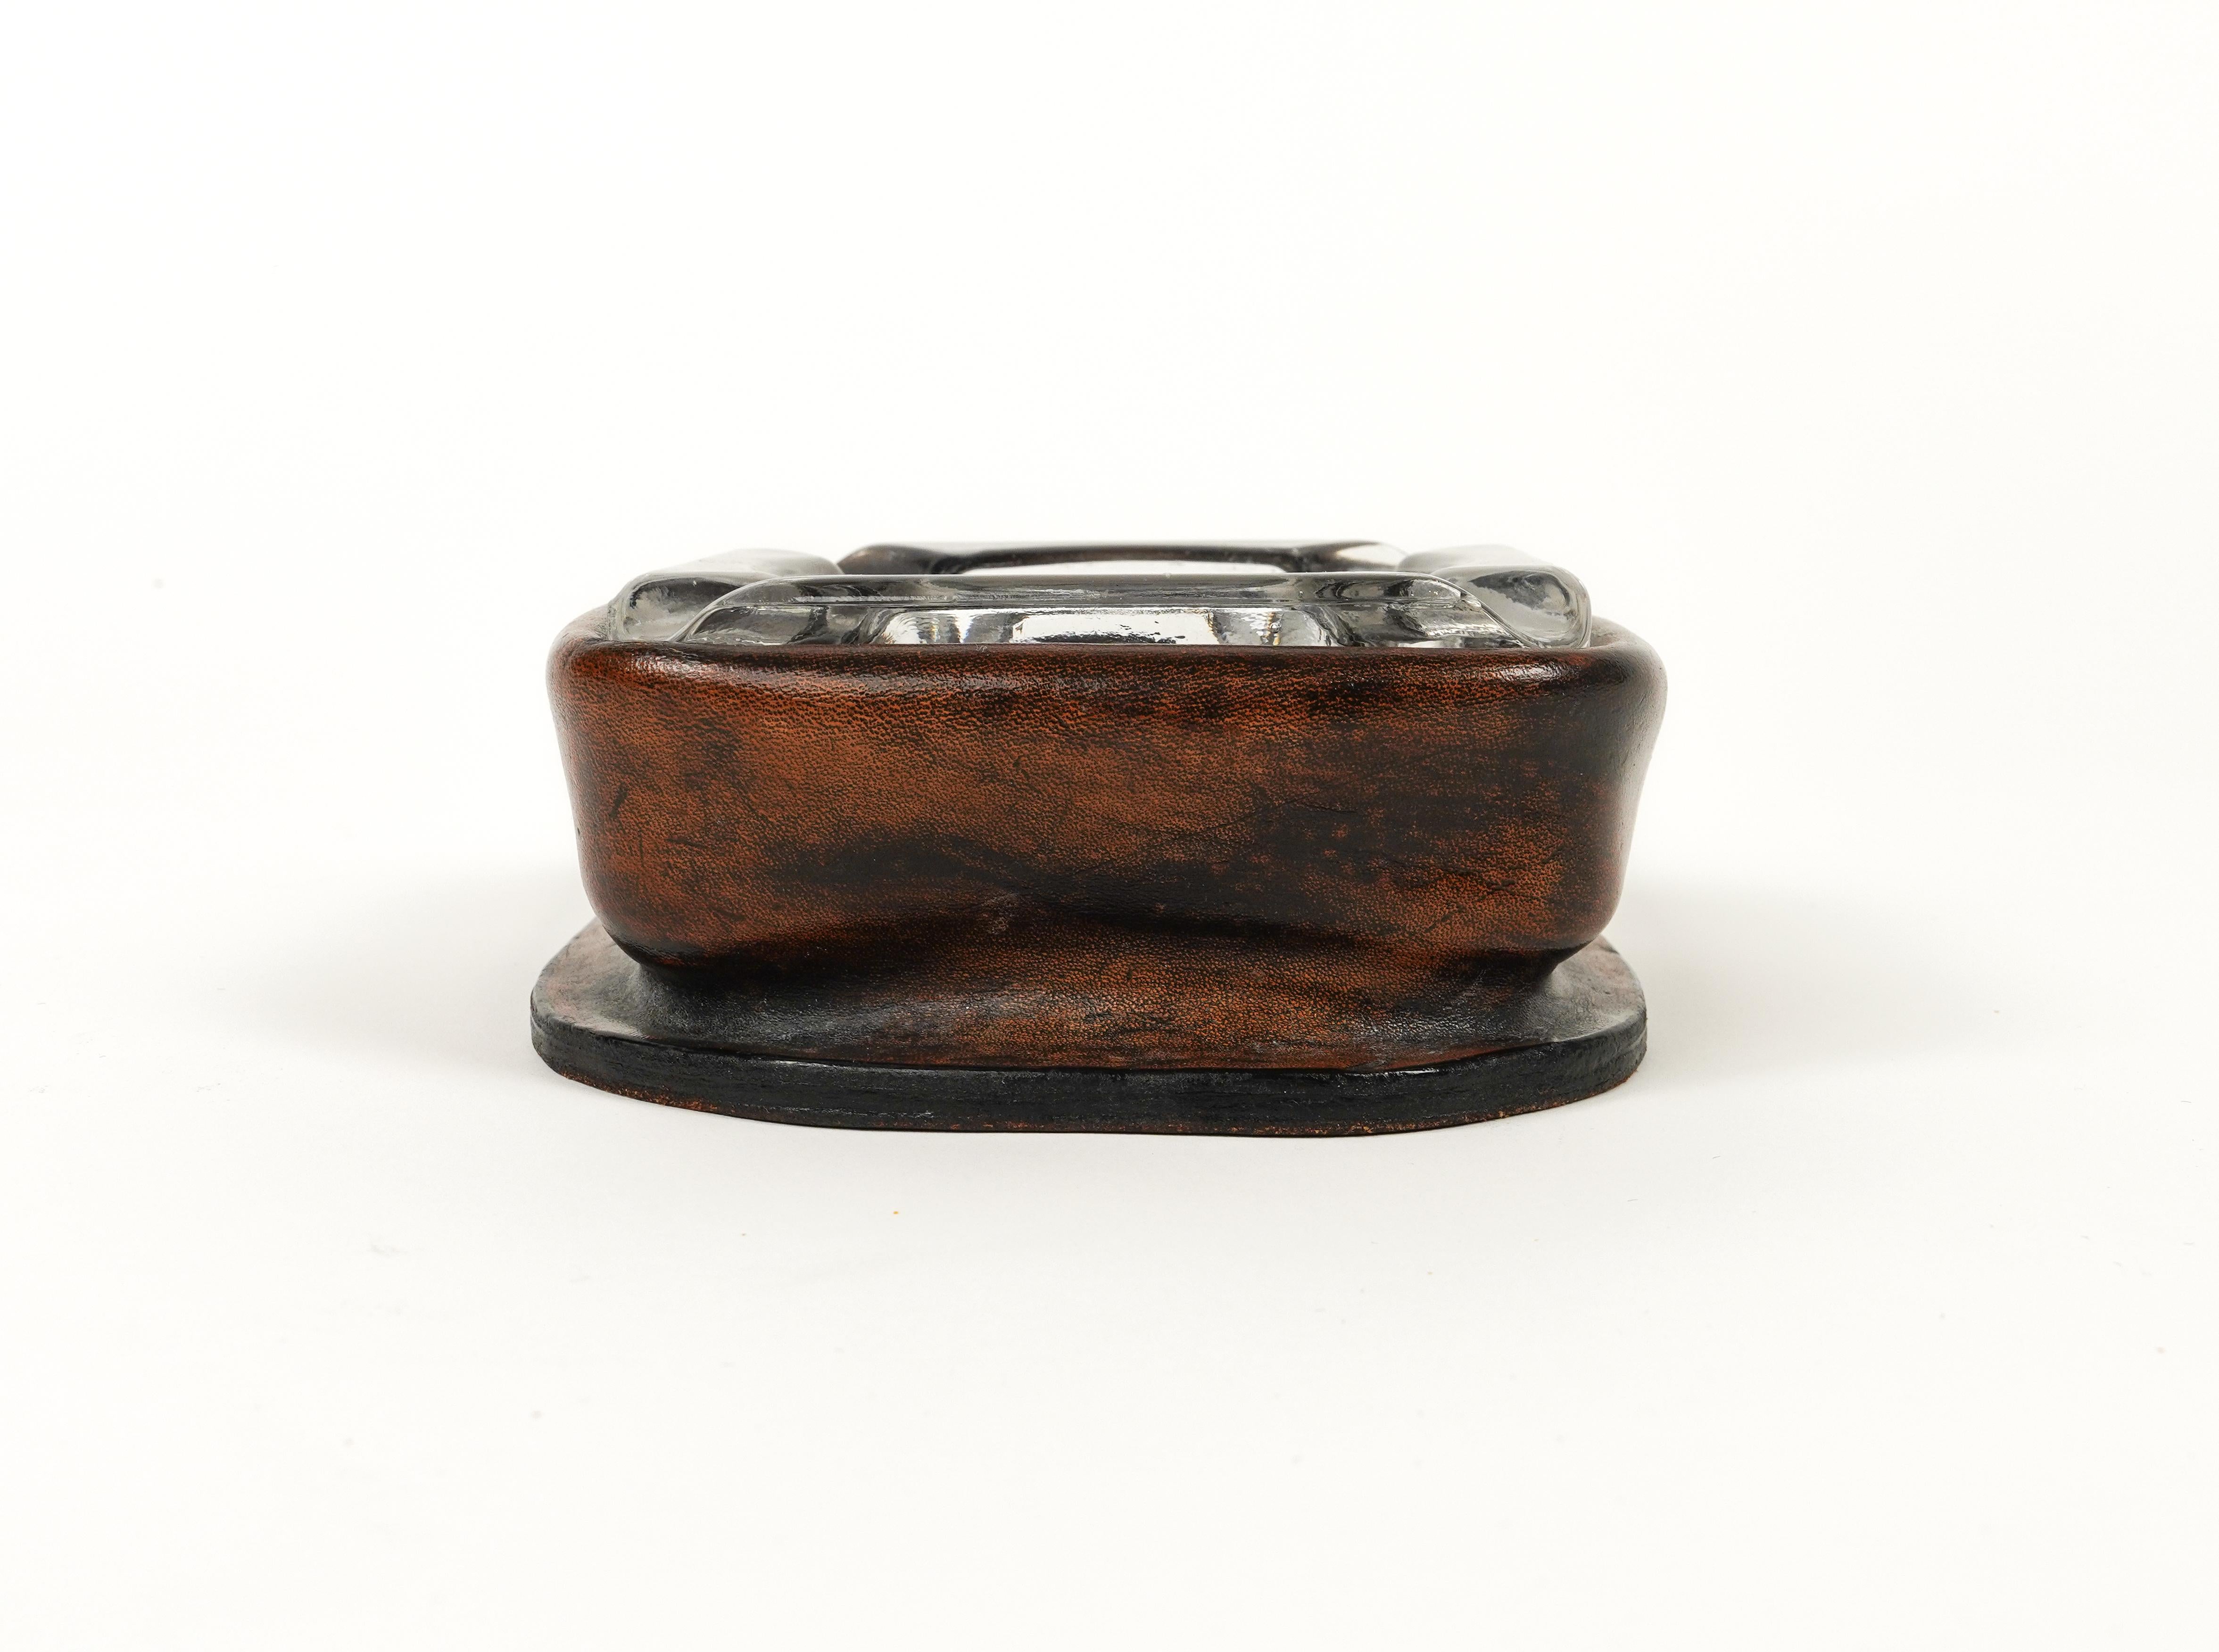 Midcentury Squared Ashtray in Leather and Glass Jacques Adnet Style, Italy 1970s For Sale 1